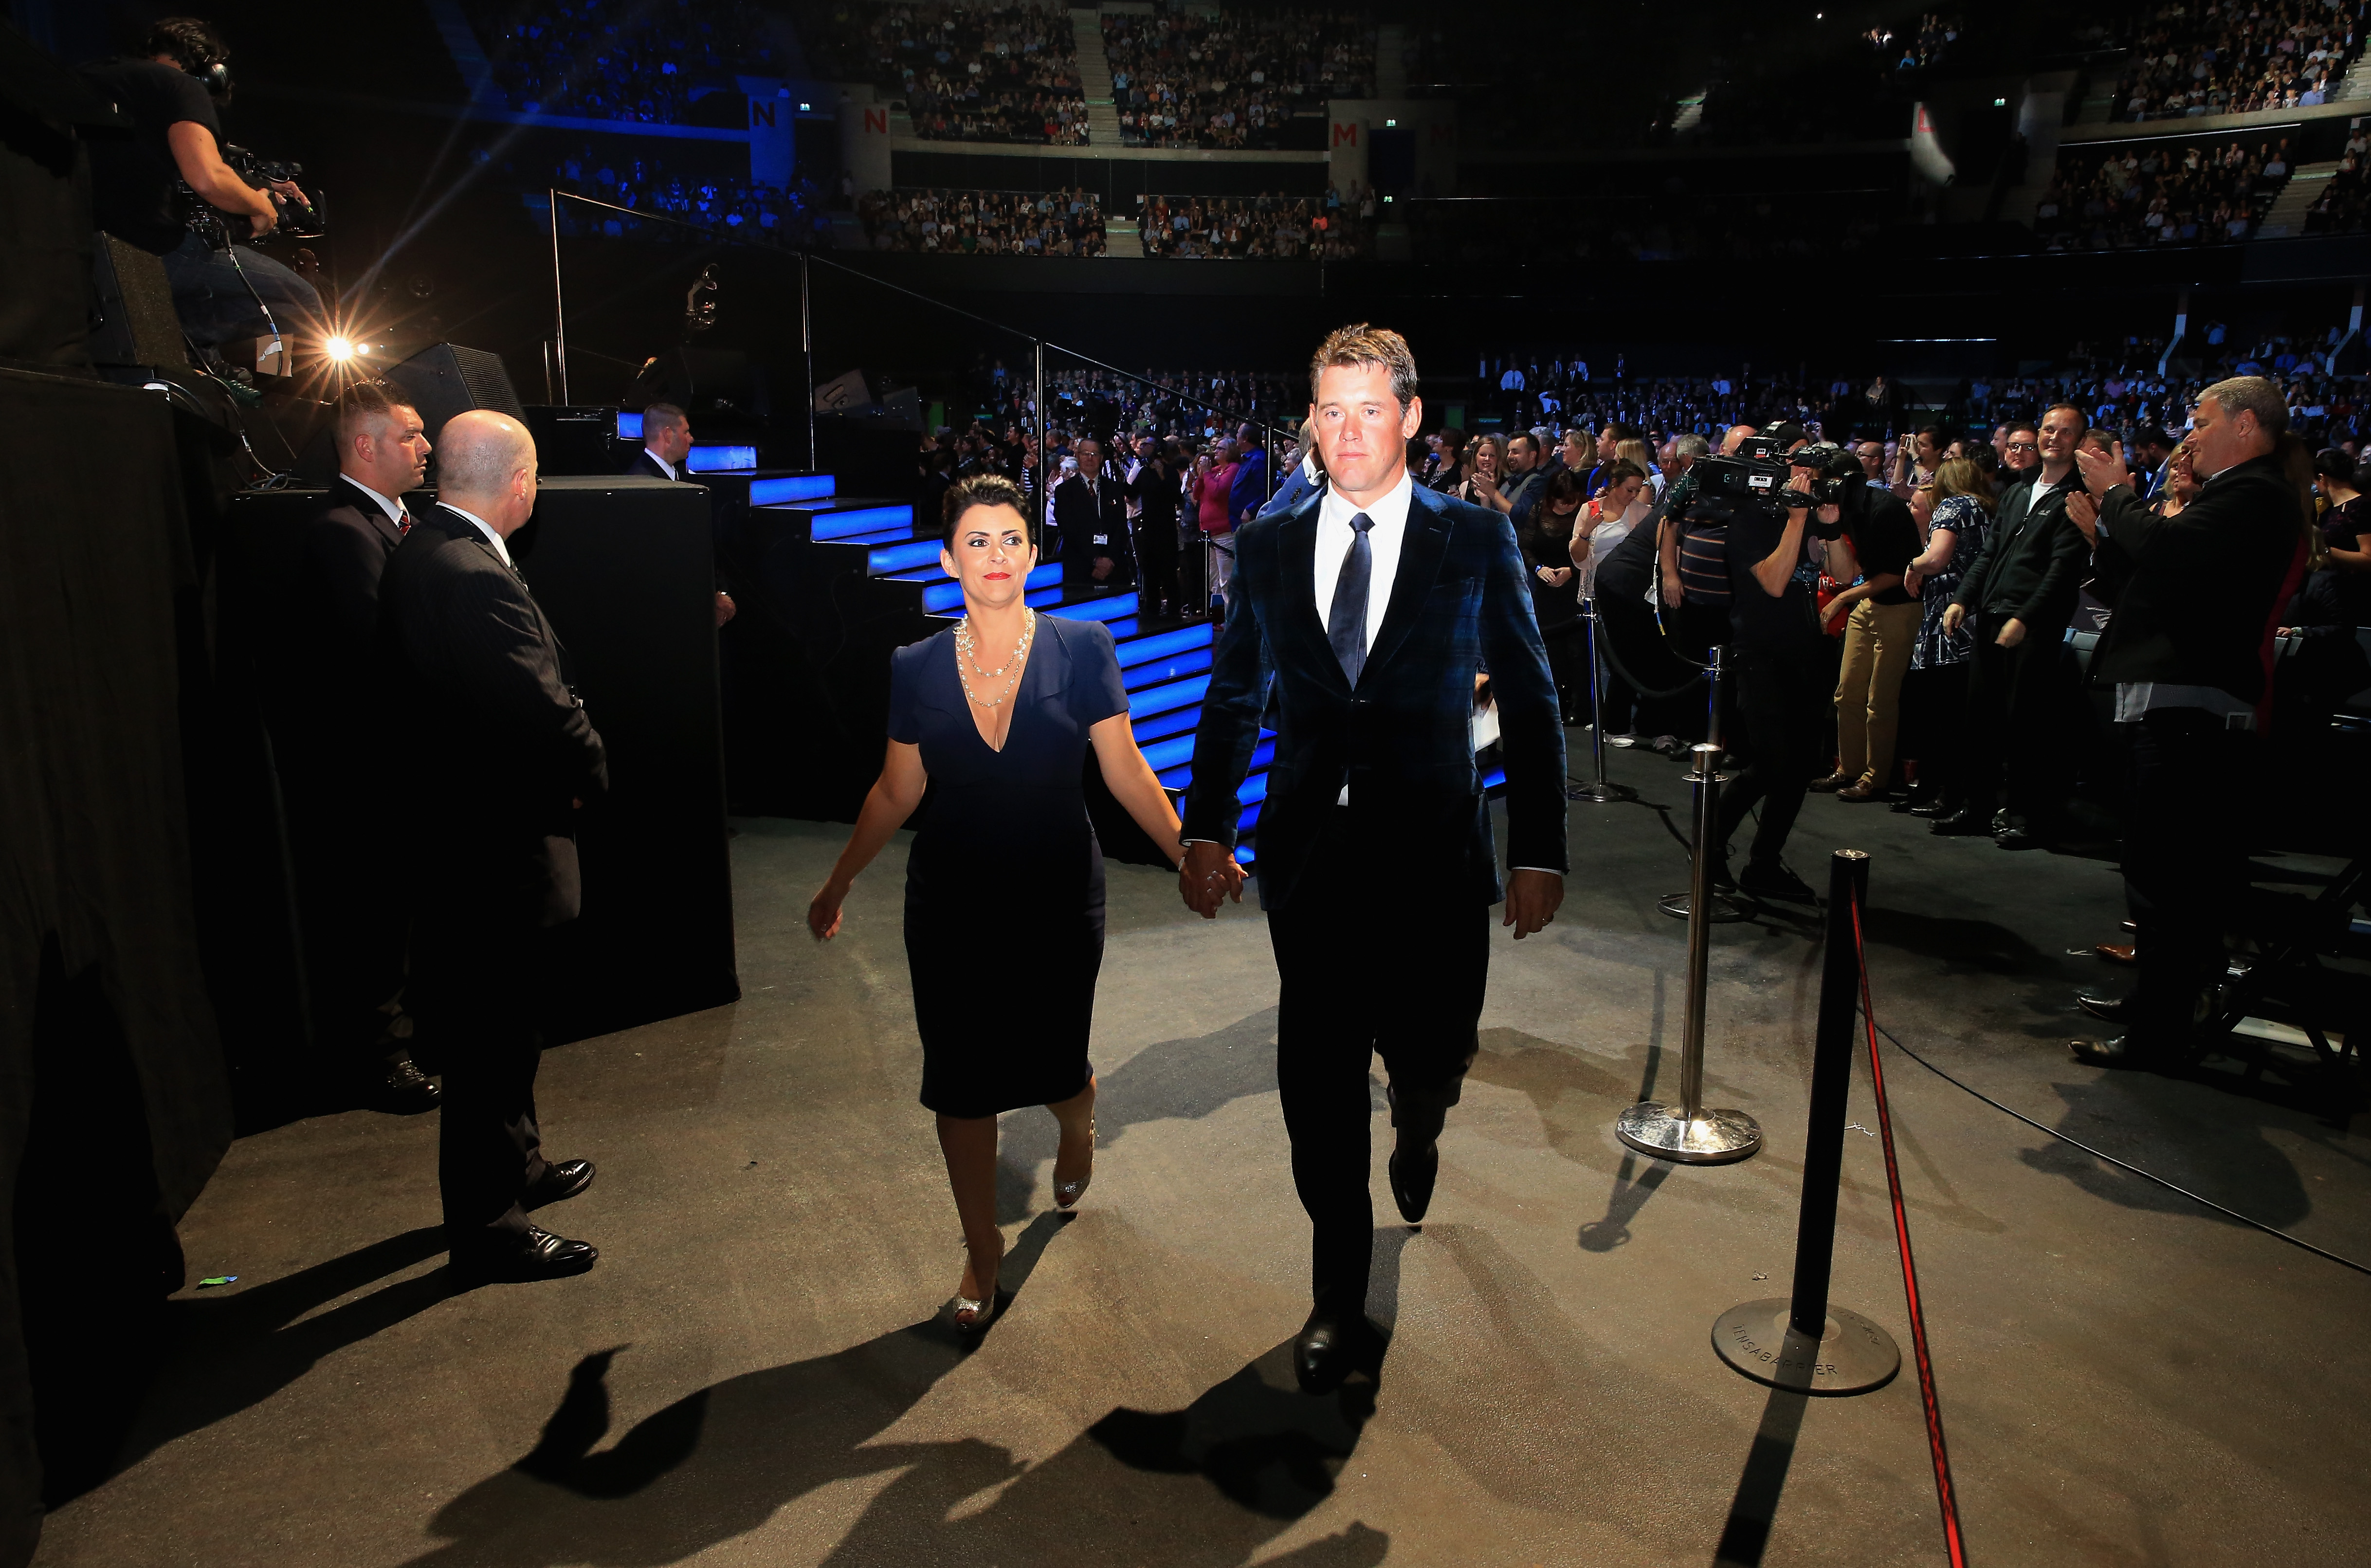 Lee Westwood and wife Laurae Westwood leave the stage during the 2014 Ryder Cup Gala Concert